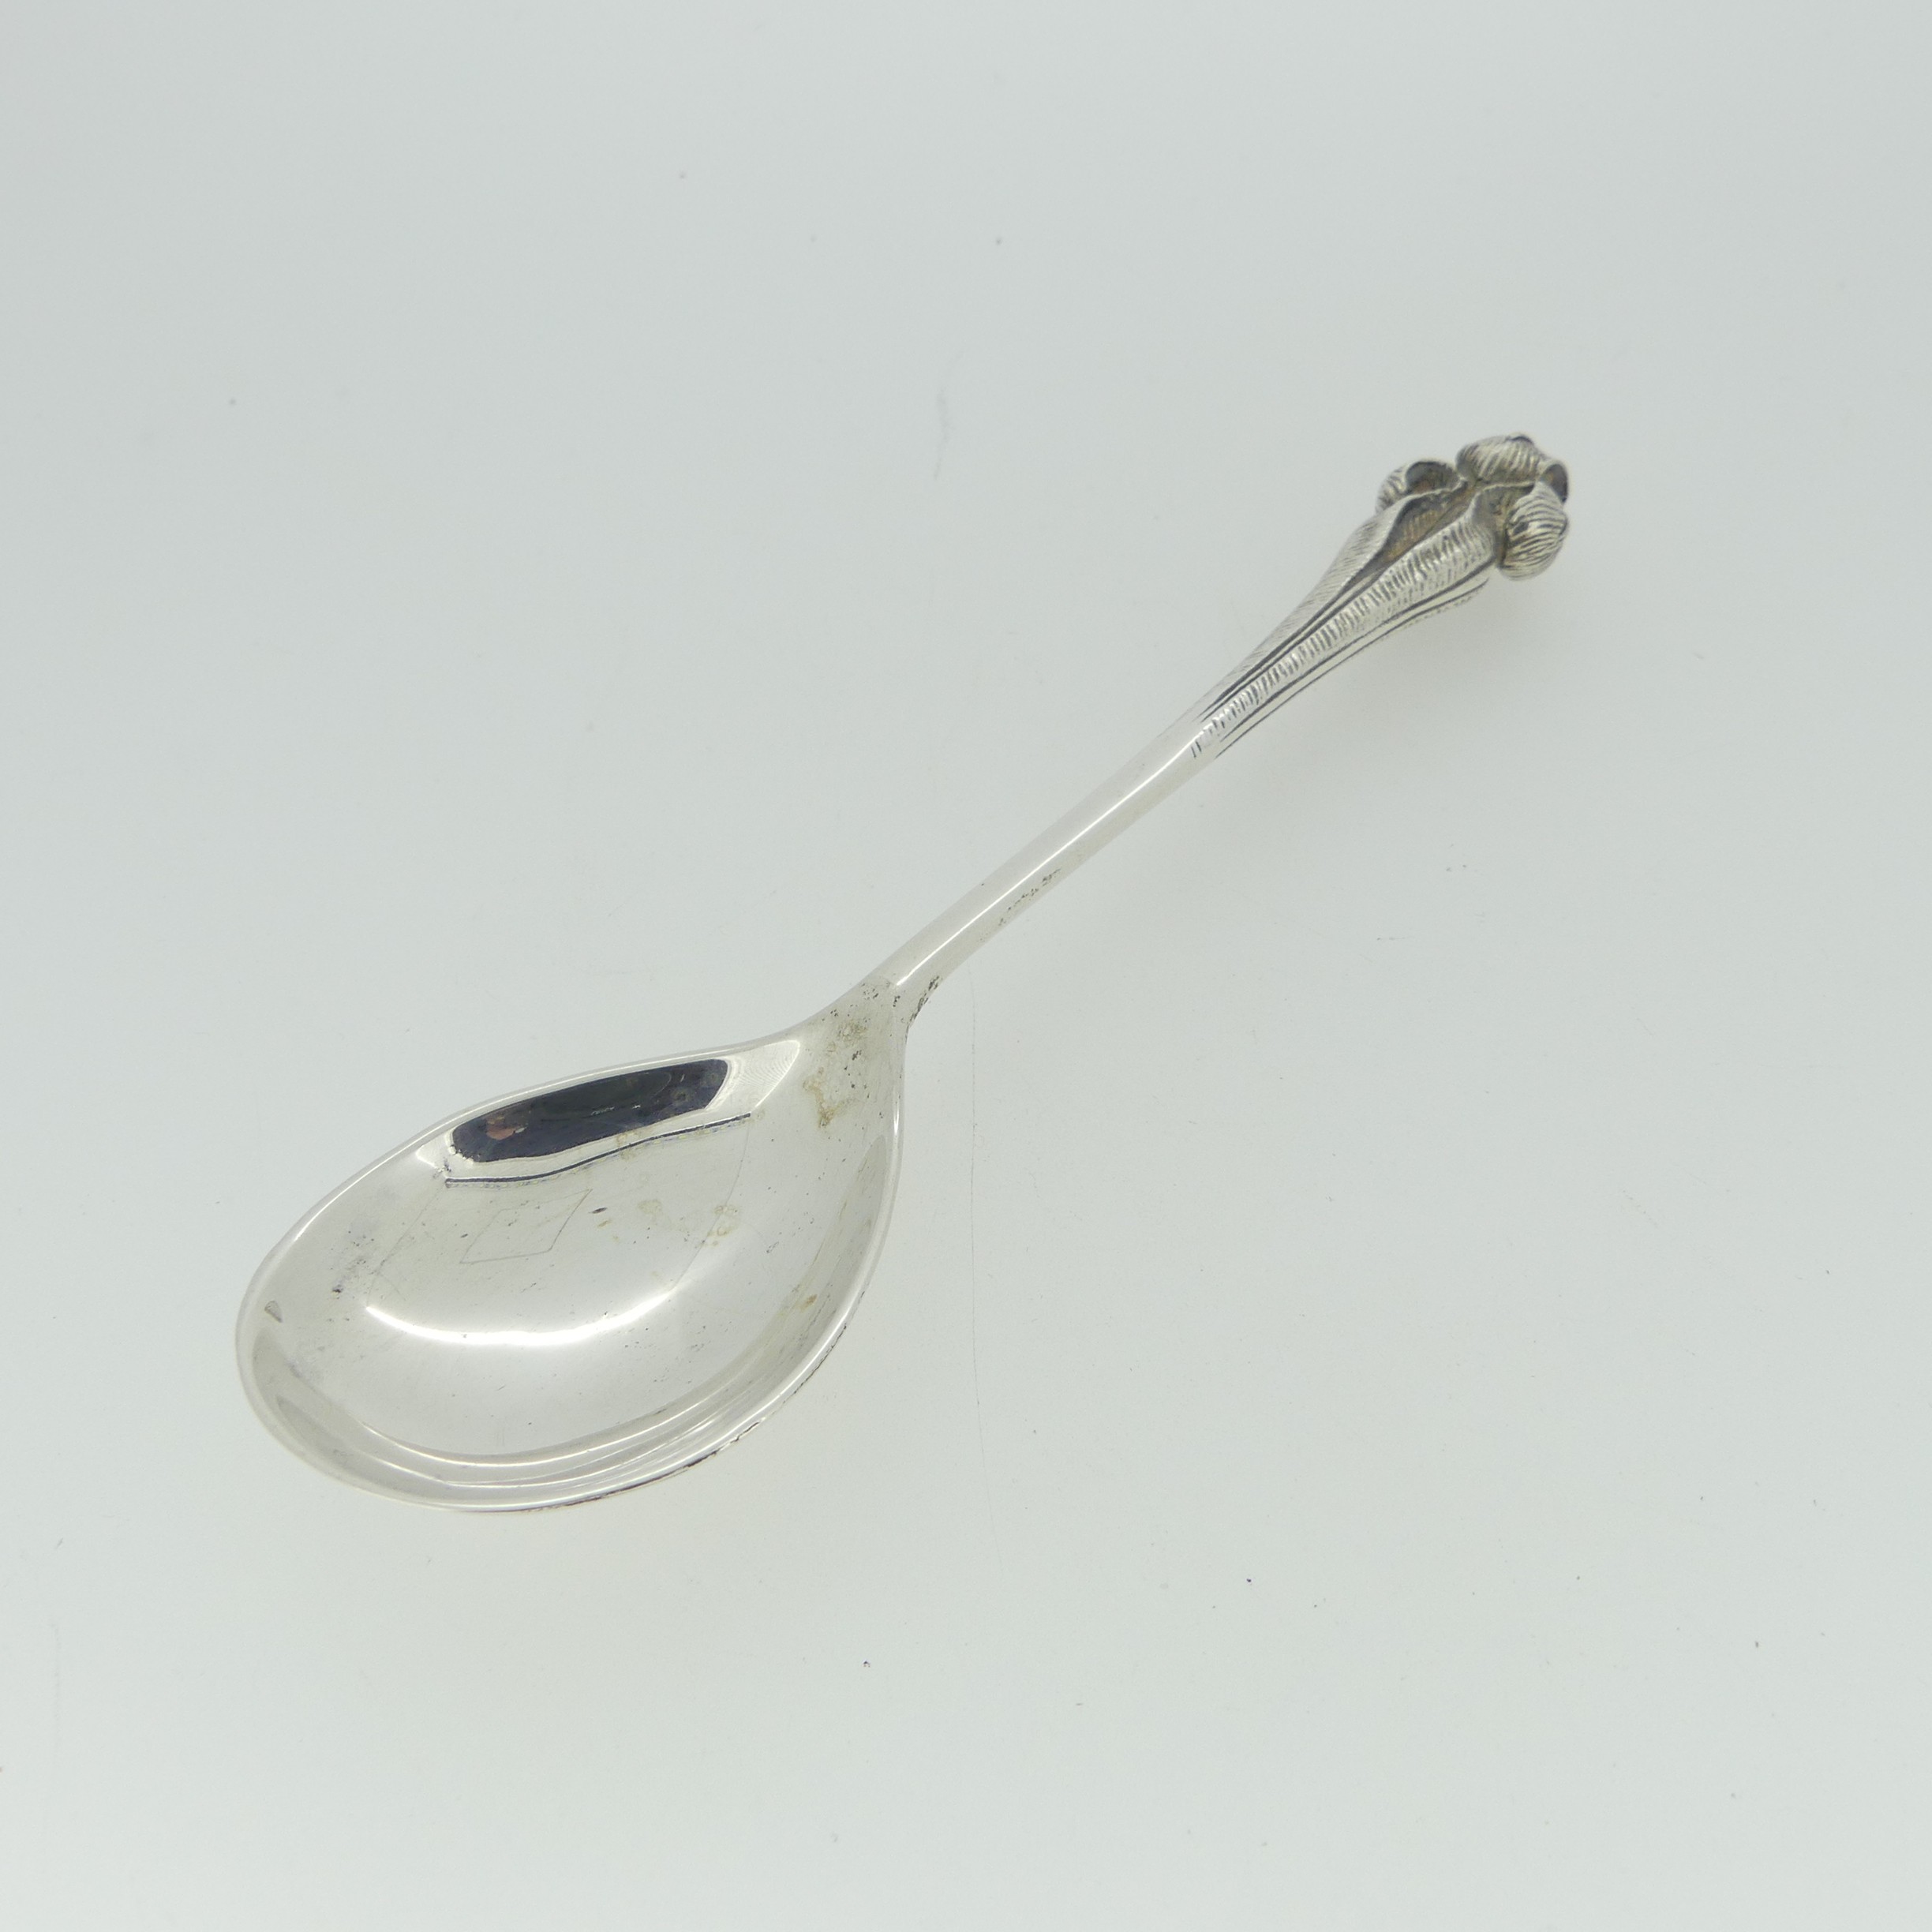 The Investiture of the Prince of Wales, Caernarfon Castle, 1969; A commemorative silver Spoon, by